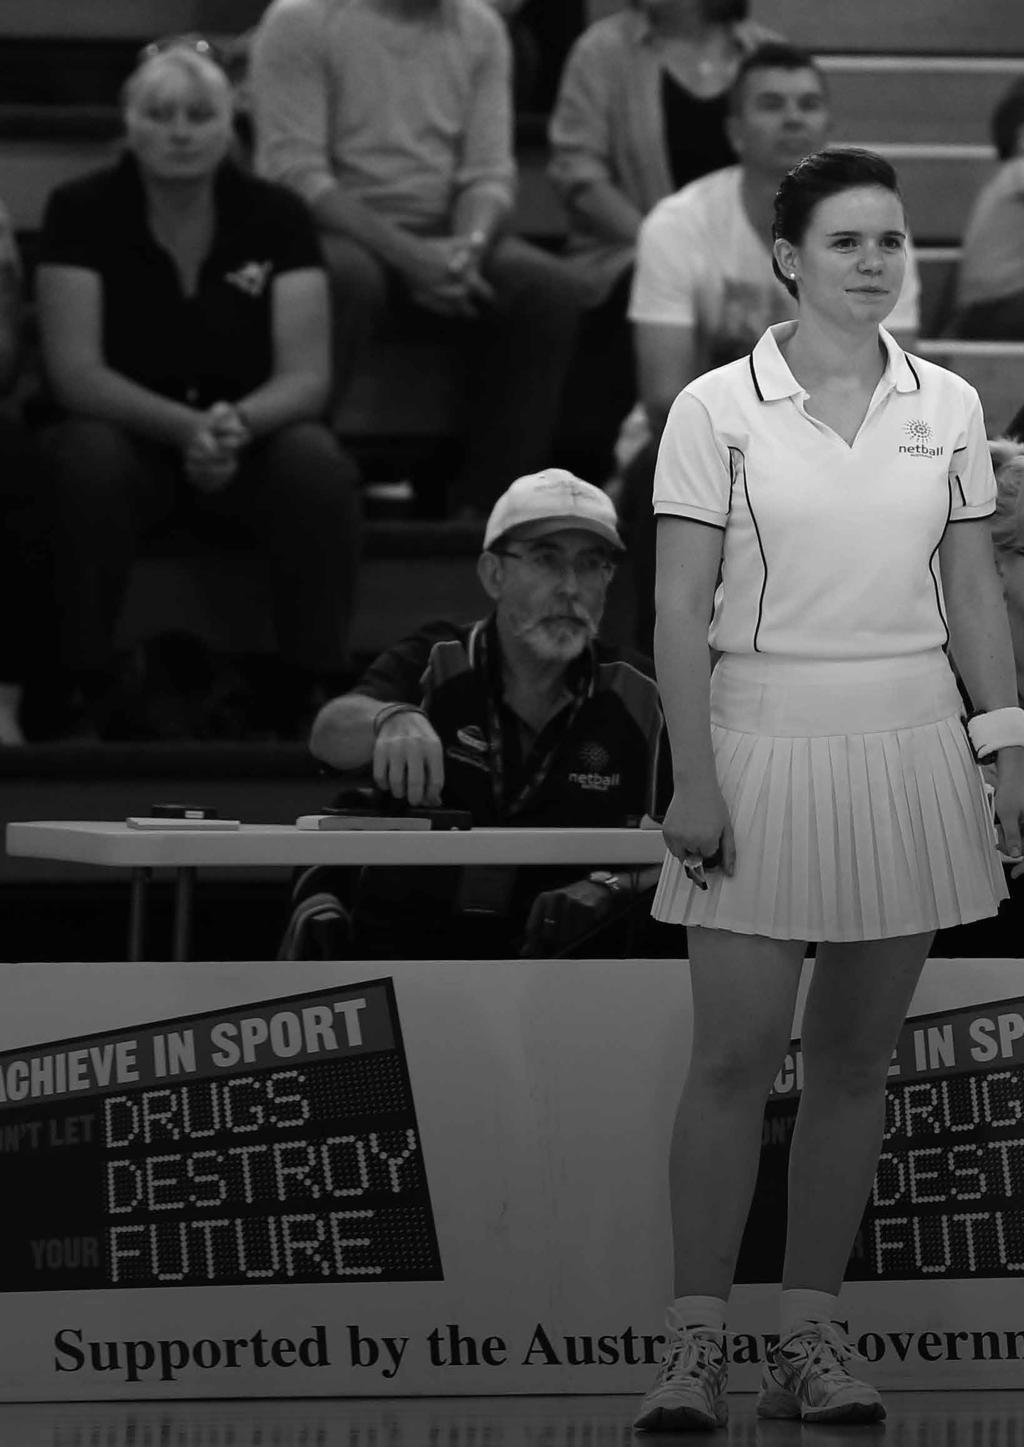 DEVELOPING UMPIRE PROGRAM DEVELOPING UMPIRE PROGRAM The Netball Australia Developing Umpire Program is the third tier and the entry point to the National High Performance Umpire Pathway.